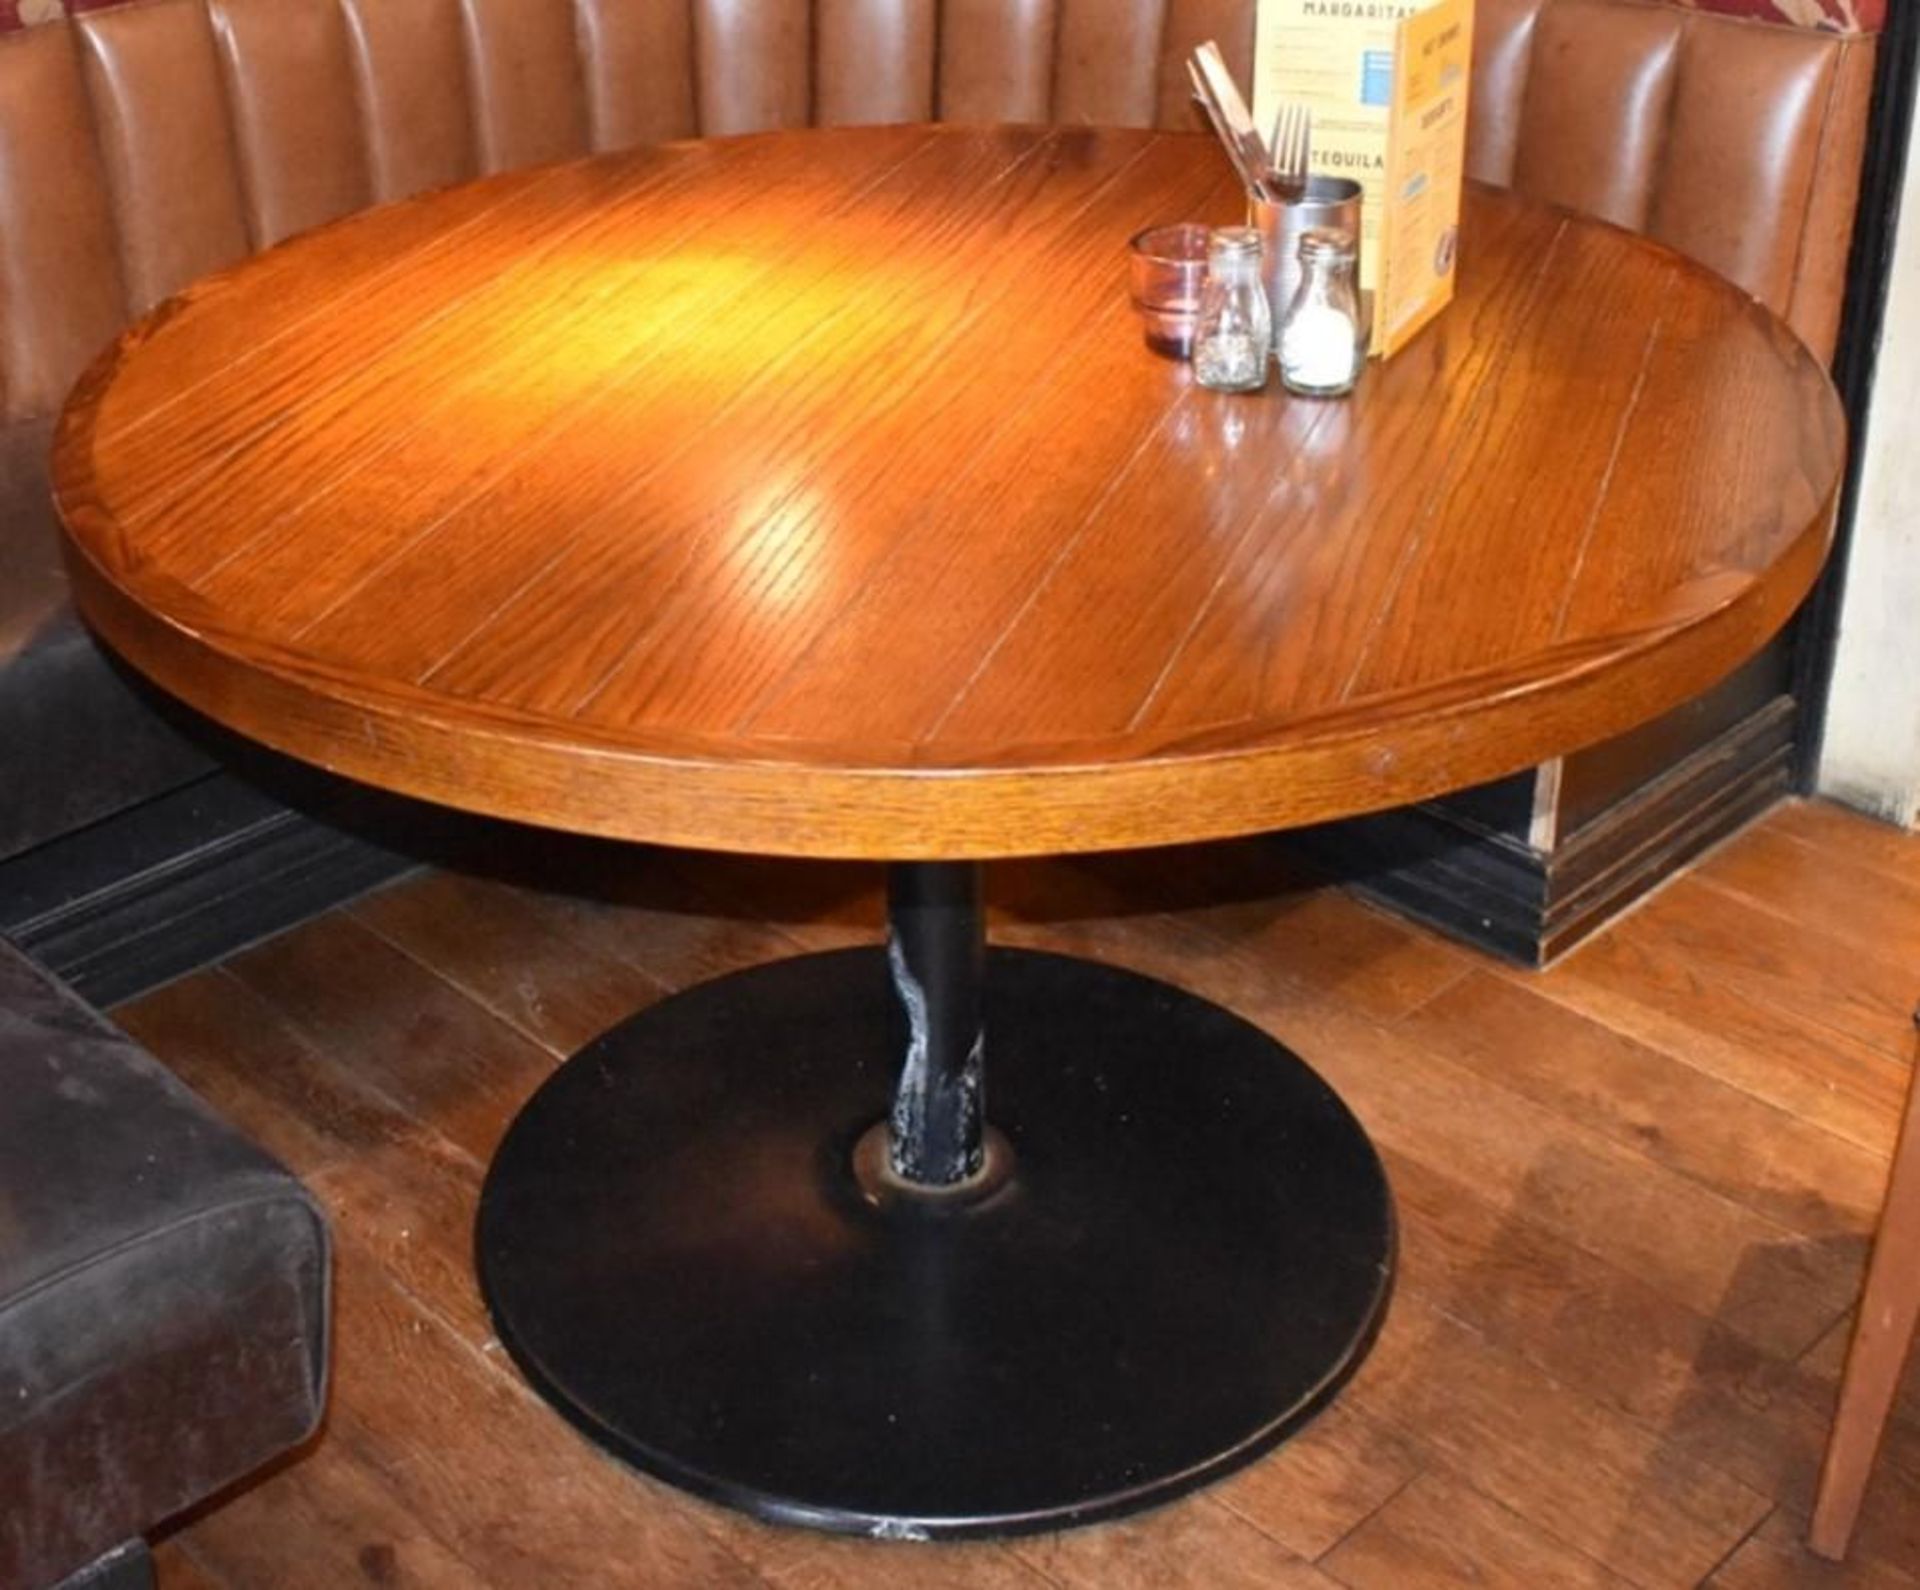 1 x Large Restaurant Dining Table With Brown Panelled Effect Top and Cast Iron Bases - H76 x W120 cm